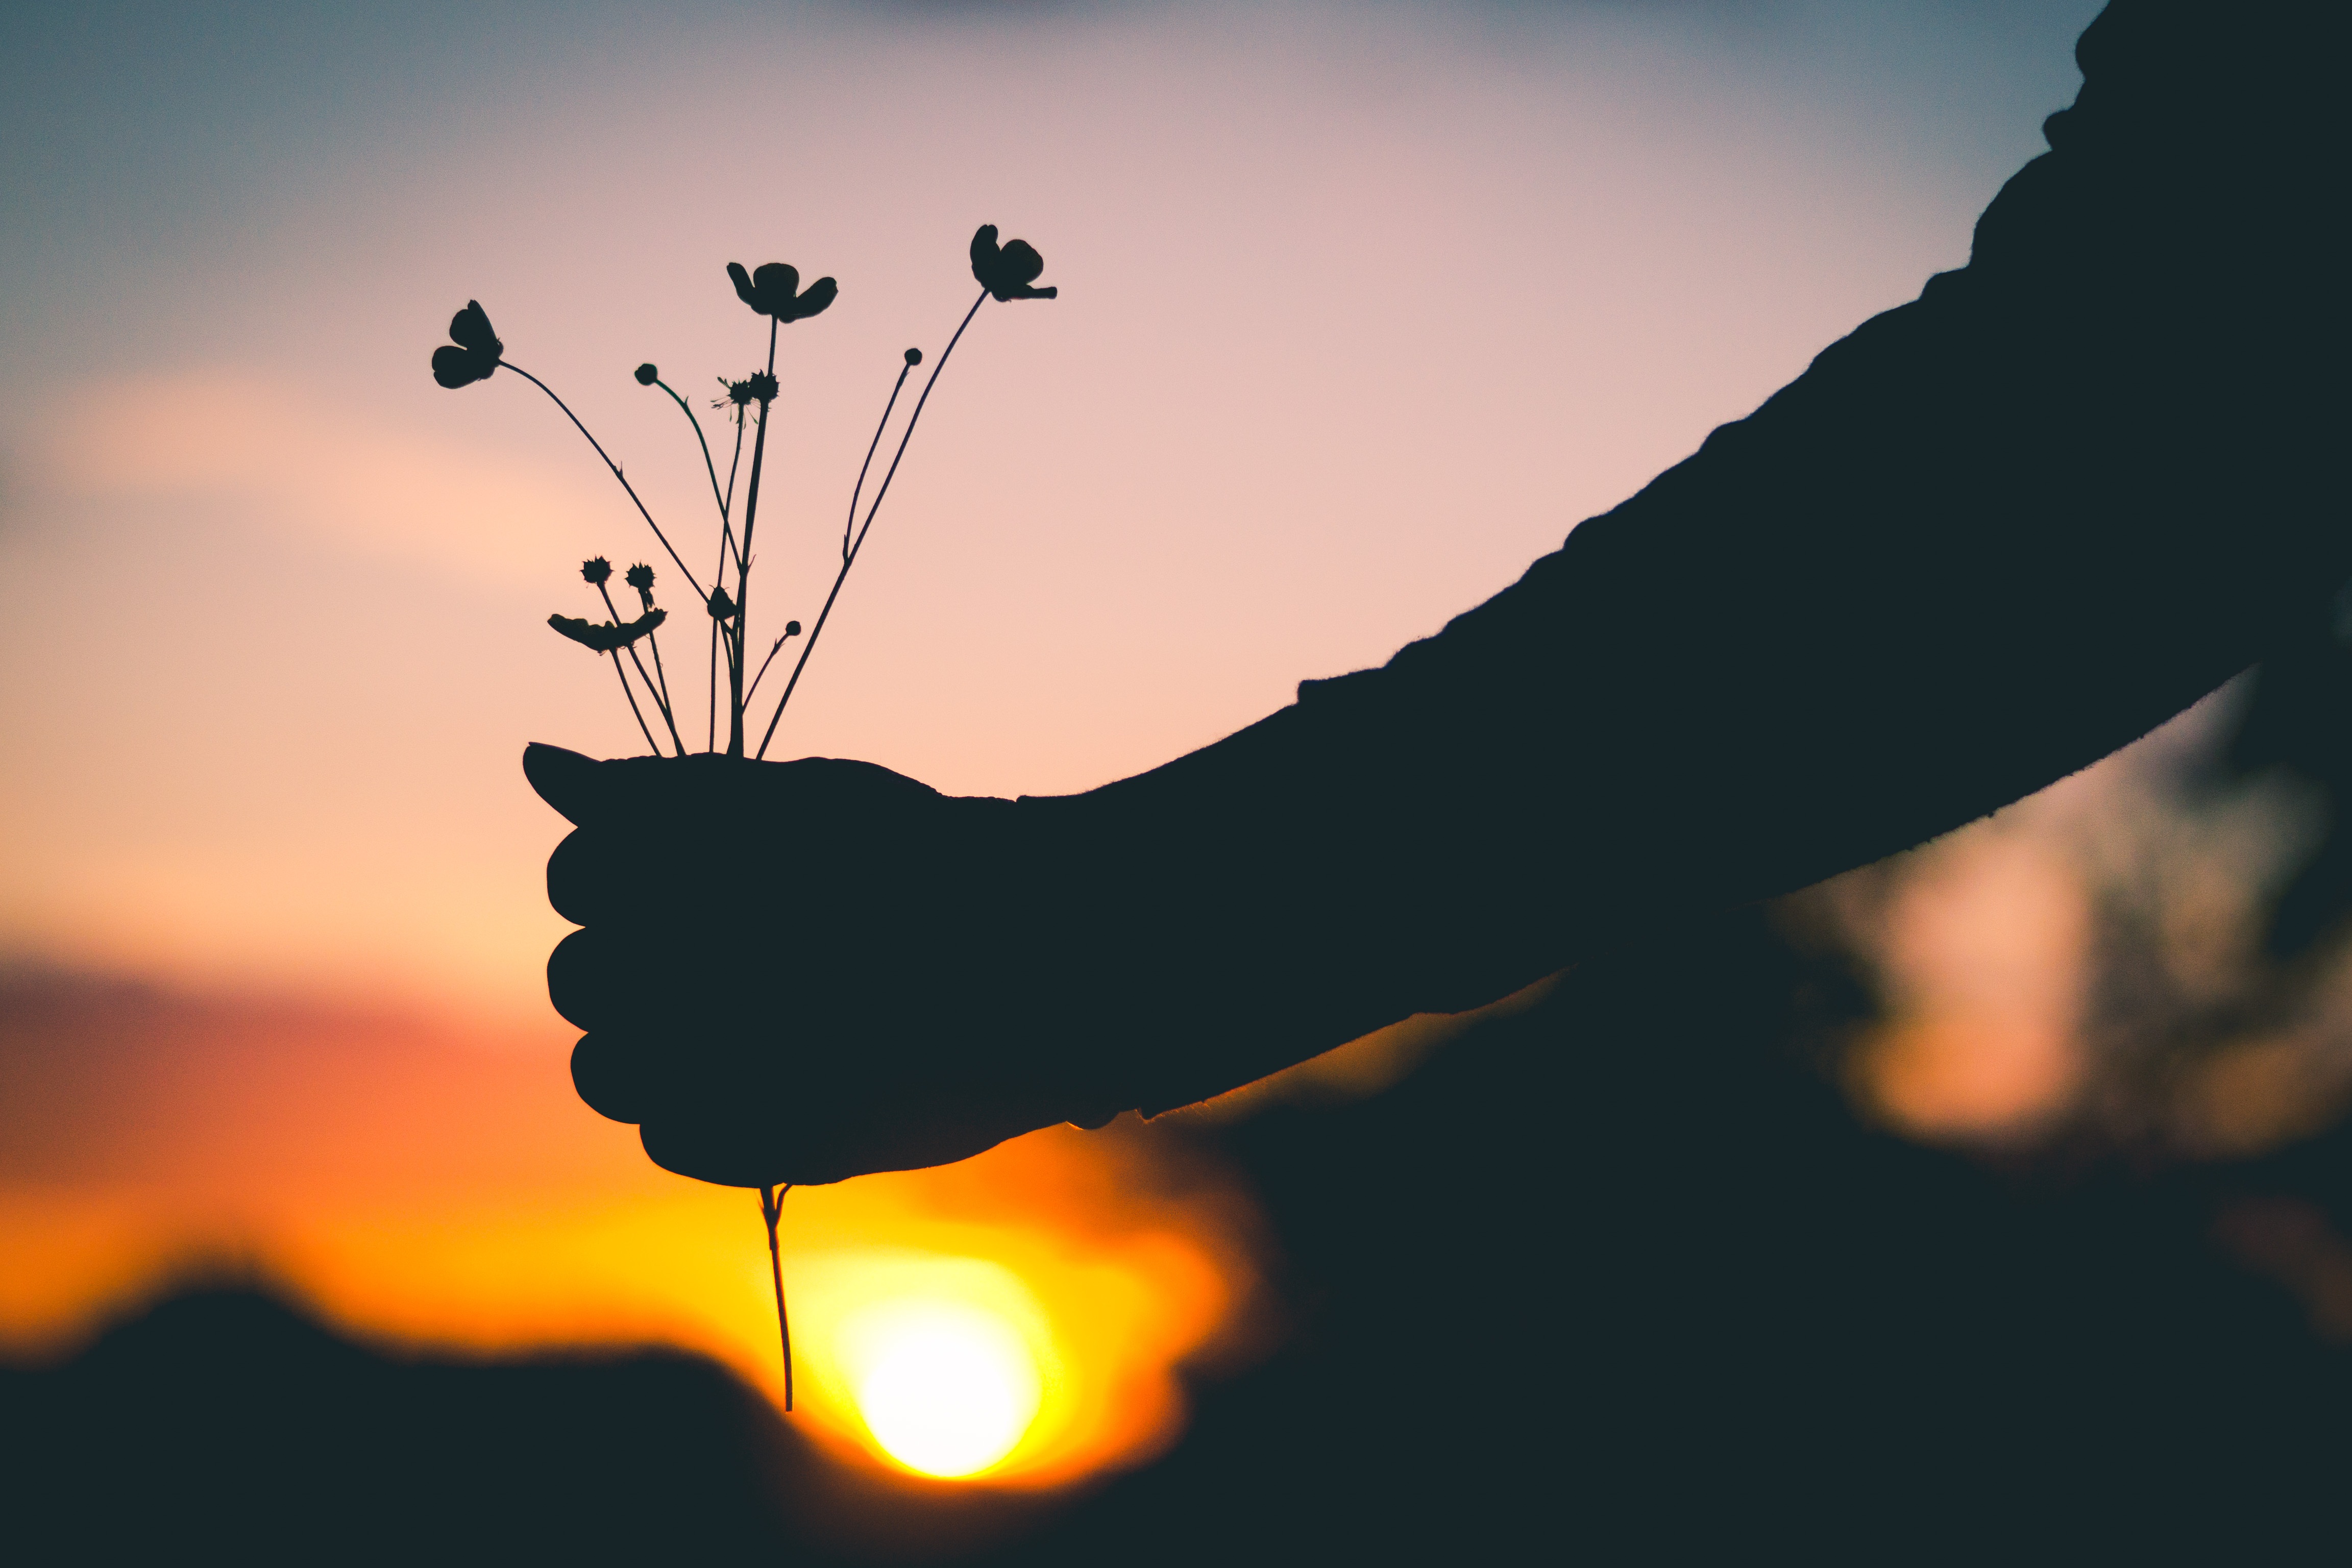 Download wallpaper 4608x3072 hand, flowers, silhouette